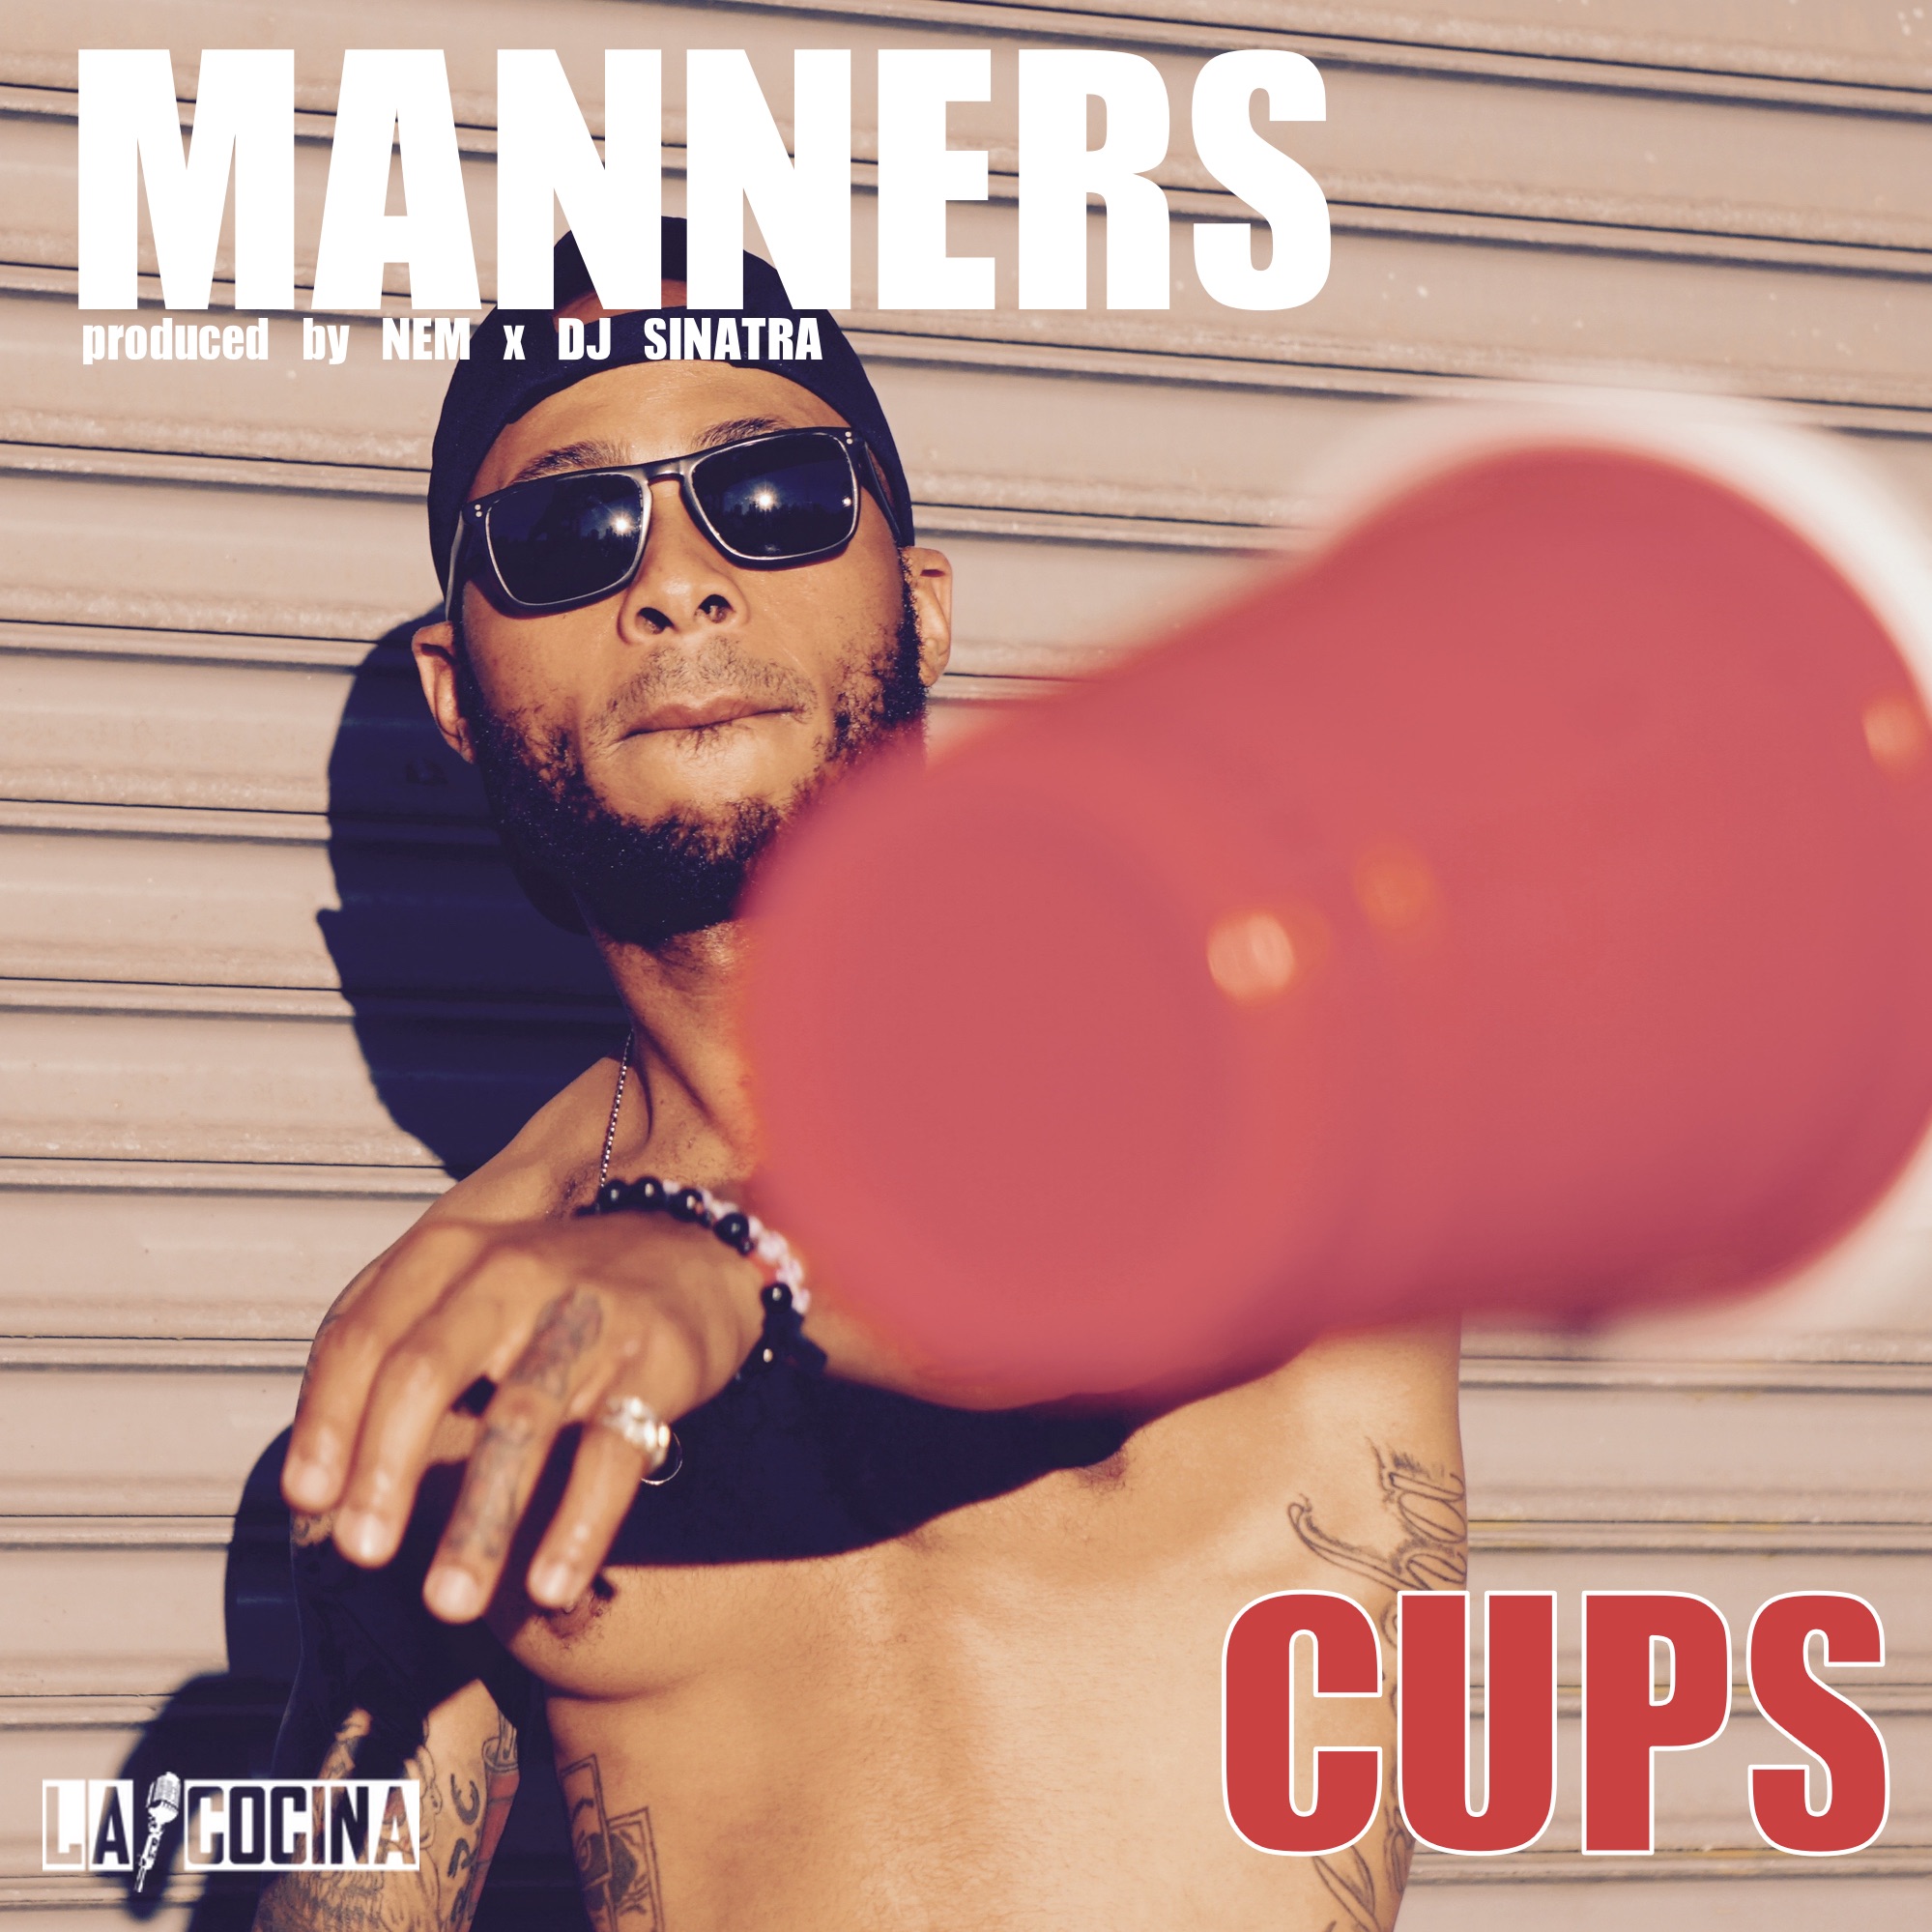 Manners is a song that dives into Cups formal side as he talks about the respect required to deal with him.